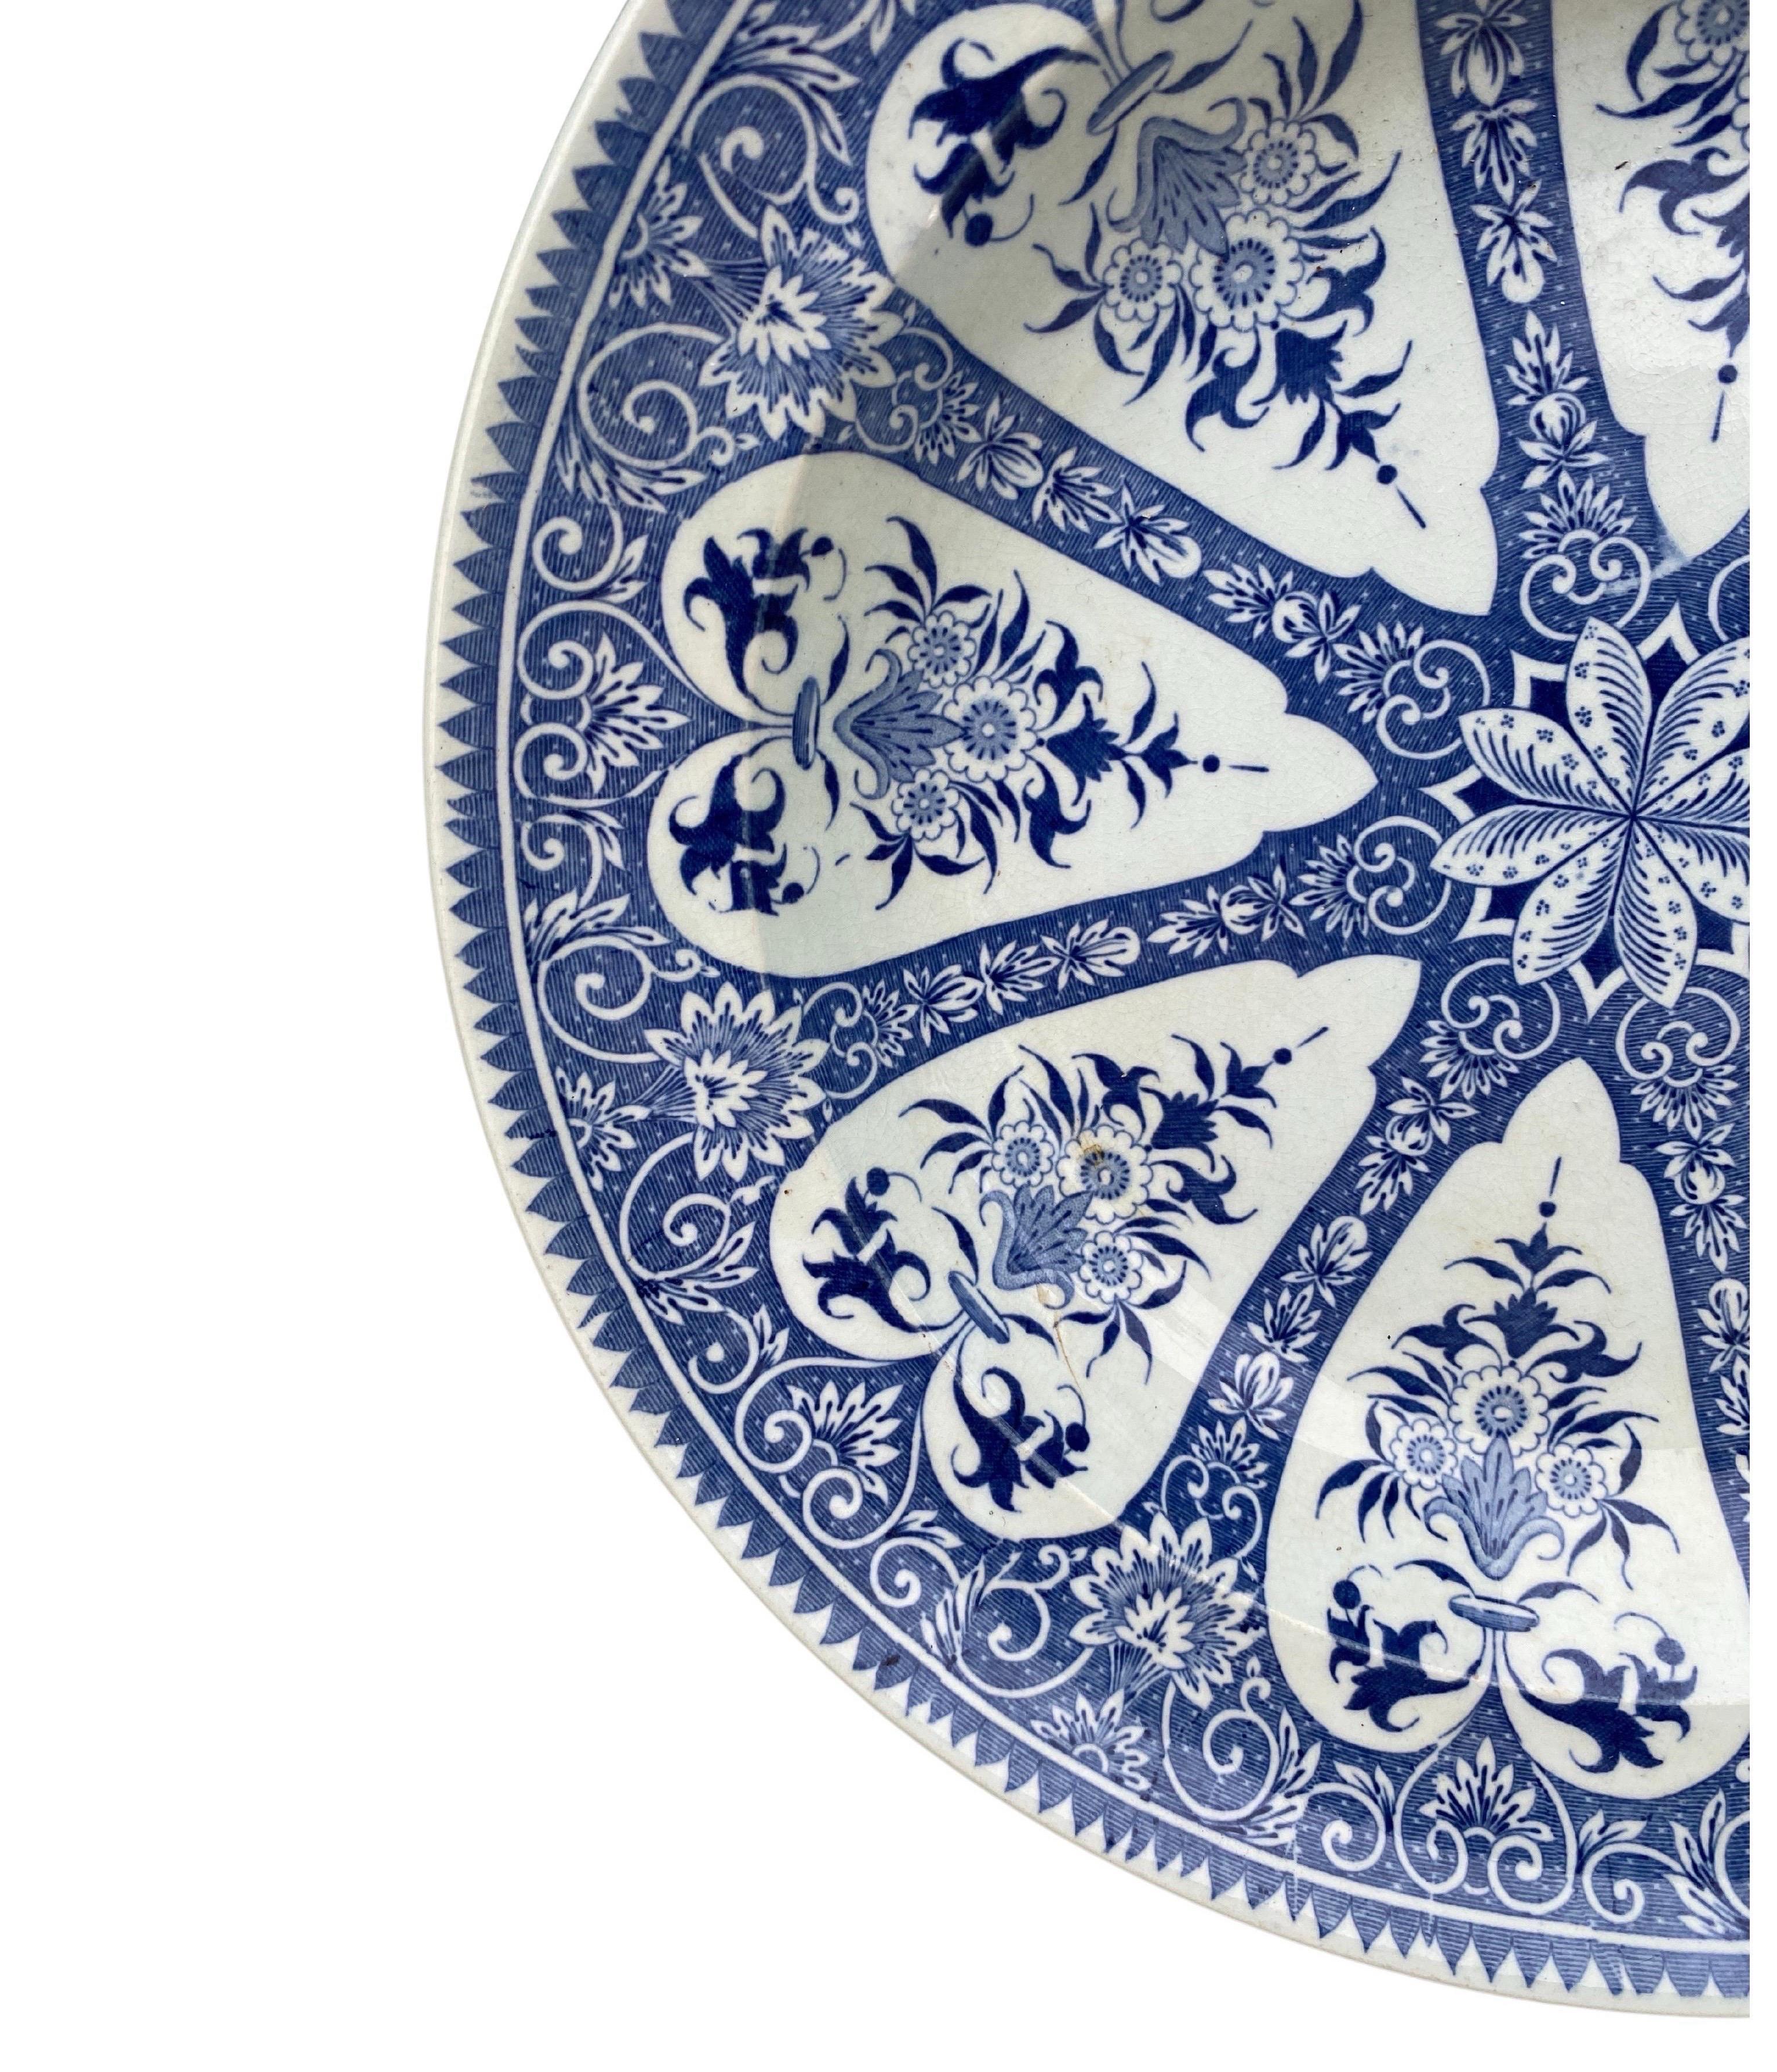 19th Century French Blue & White Faience Soup Plate Sarreguemines In Good Condition For Sale In Austin, TX